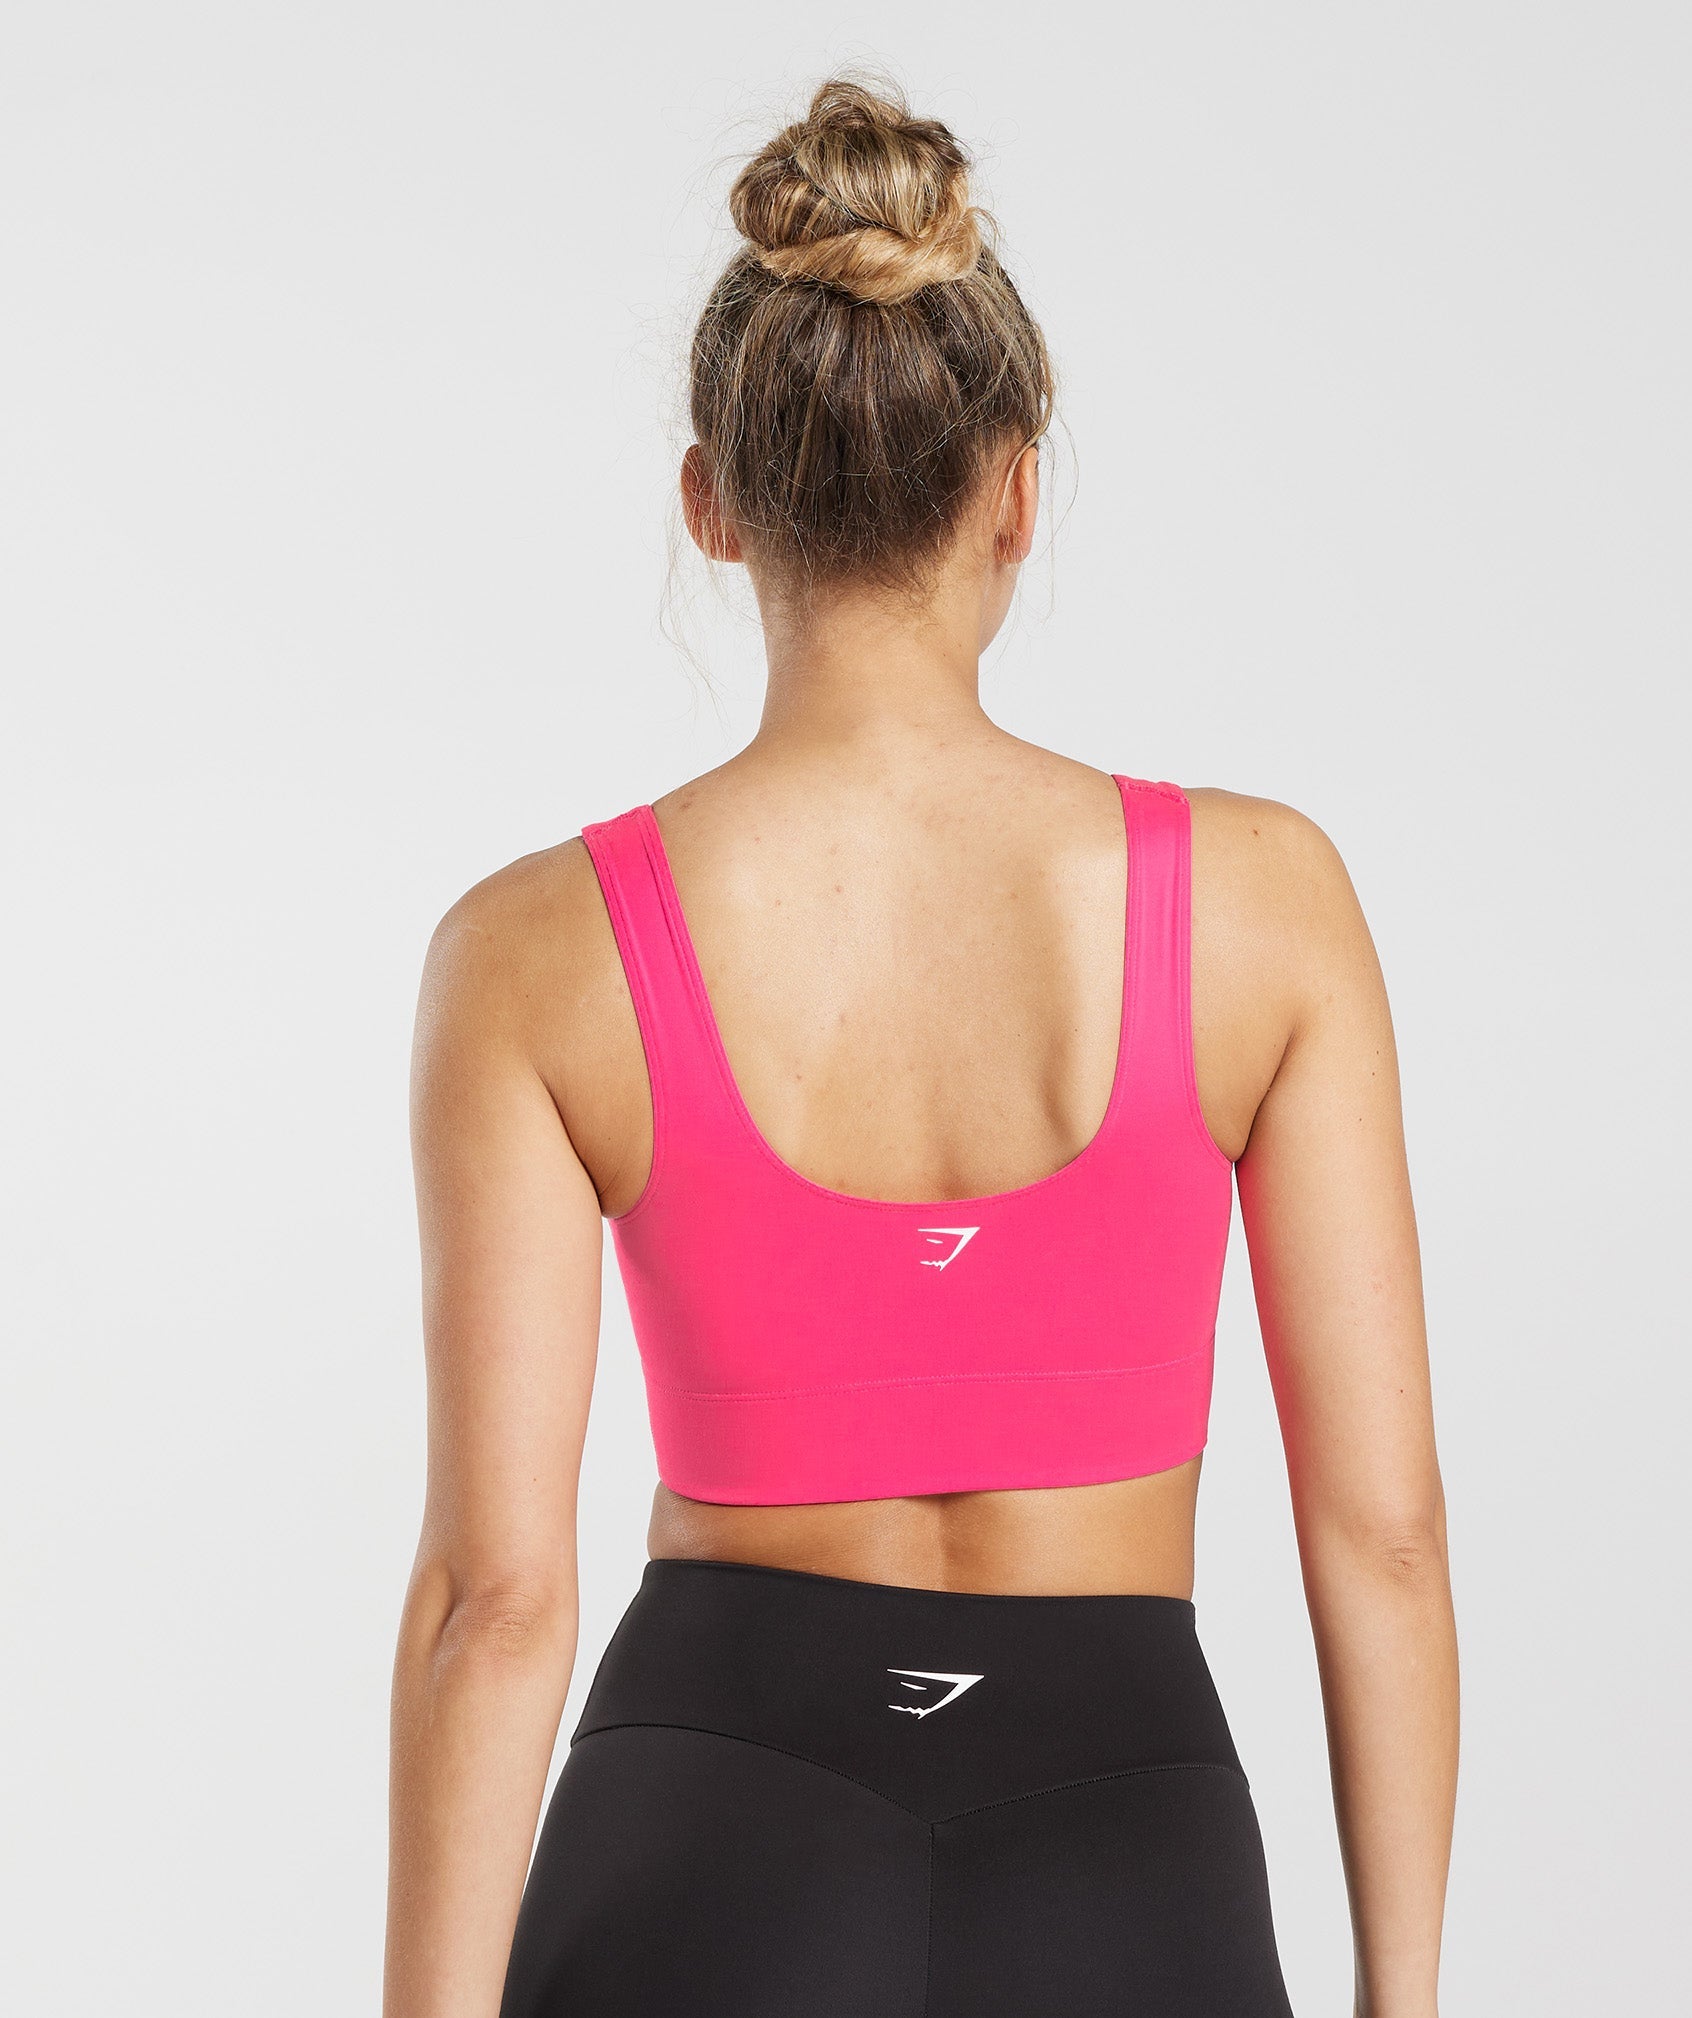 Buy Embibo Cotton Sports Bra for Women/Girls Stretchable Non-Padded and  Non-Wired Full Coverage Bra for Gym,Yoga,Running,Daily Workout Color -  Pink, (Pack of 1) at